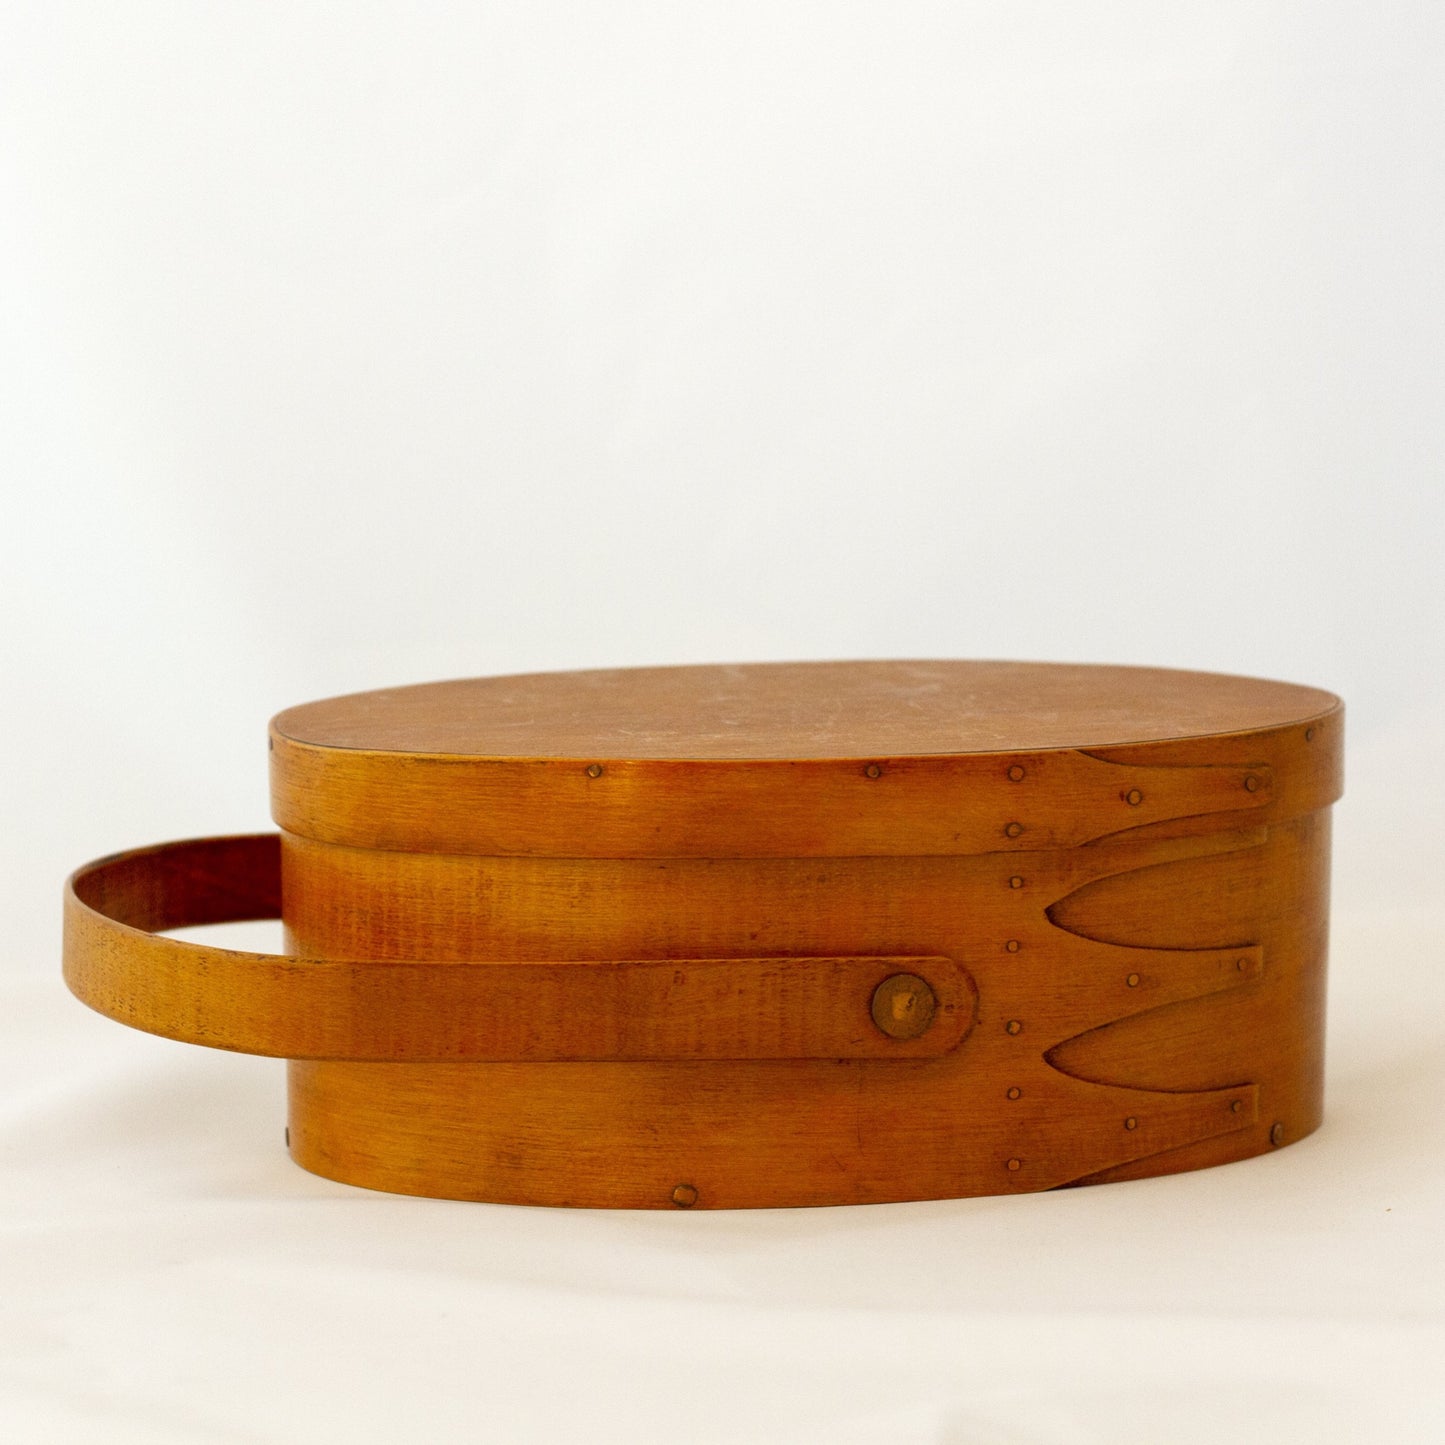 SHAKER-STYLE Swing Handle Carrier Oval Basket with Swallow Tail Joints